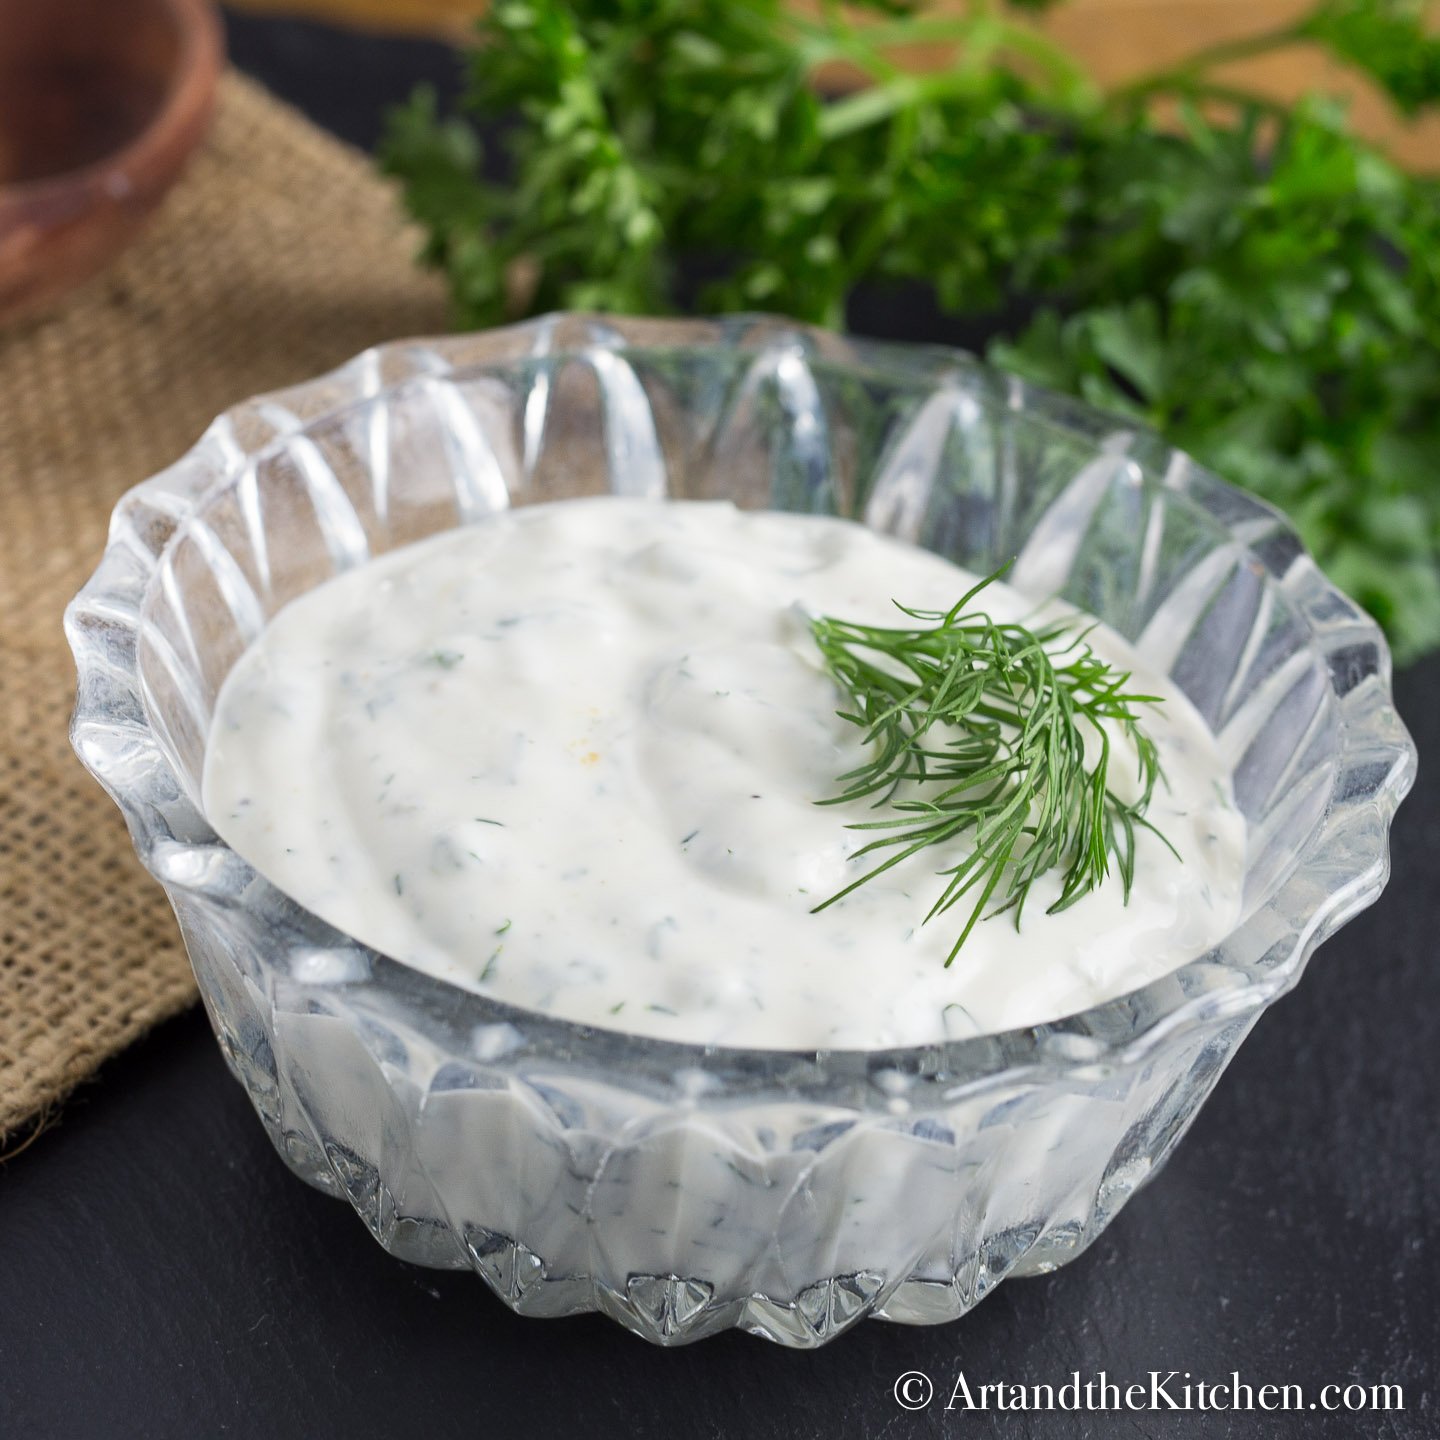 Glass bowl filled with dip, garnished with dill sprig.